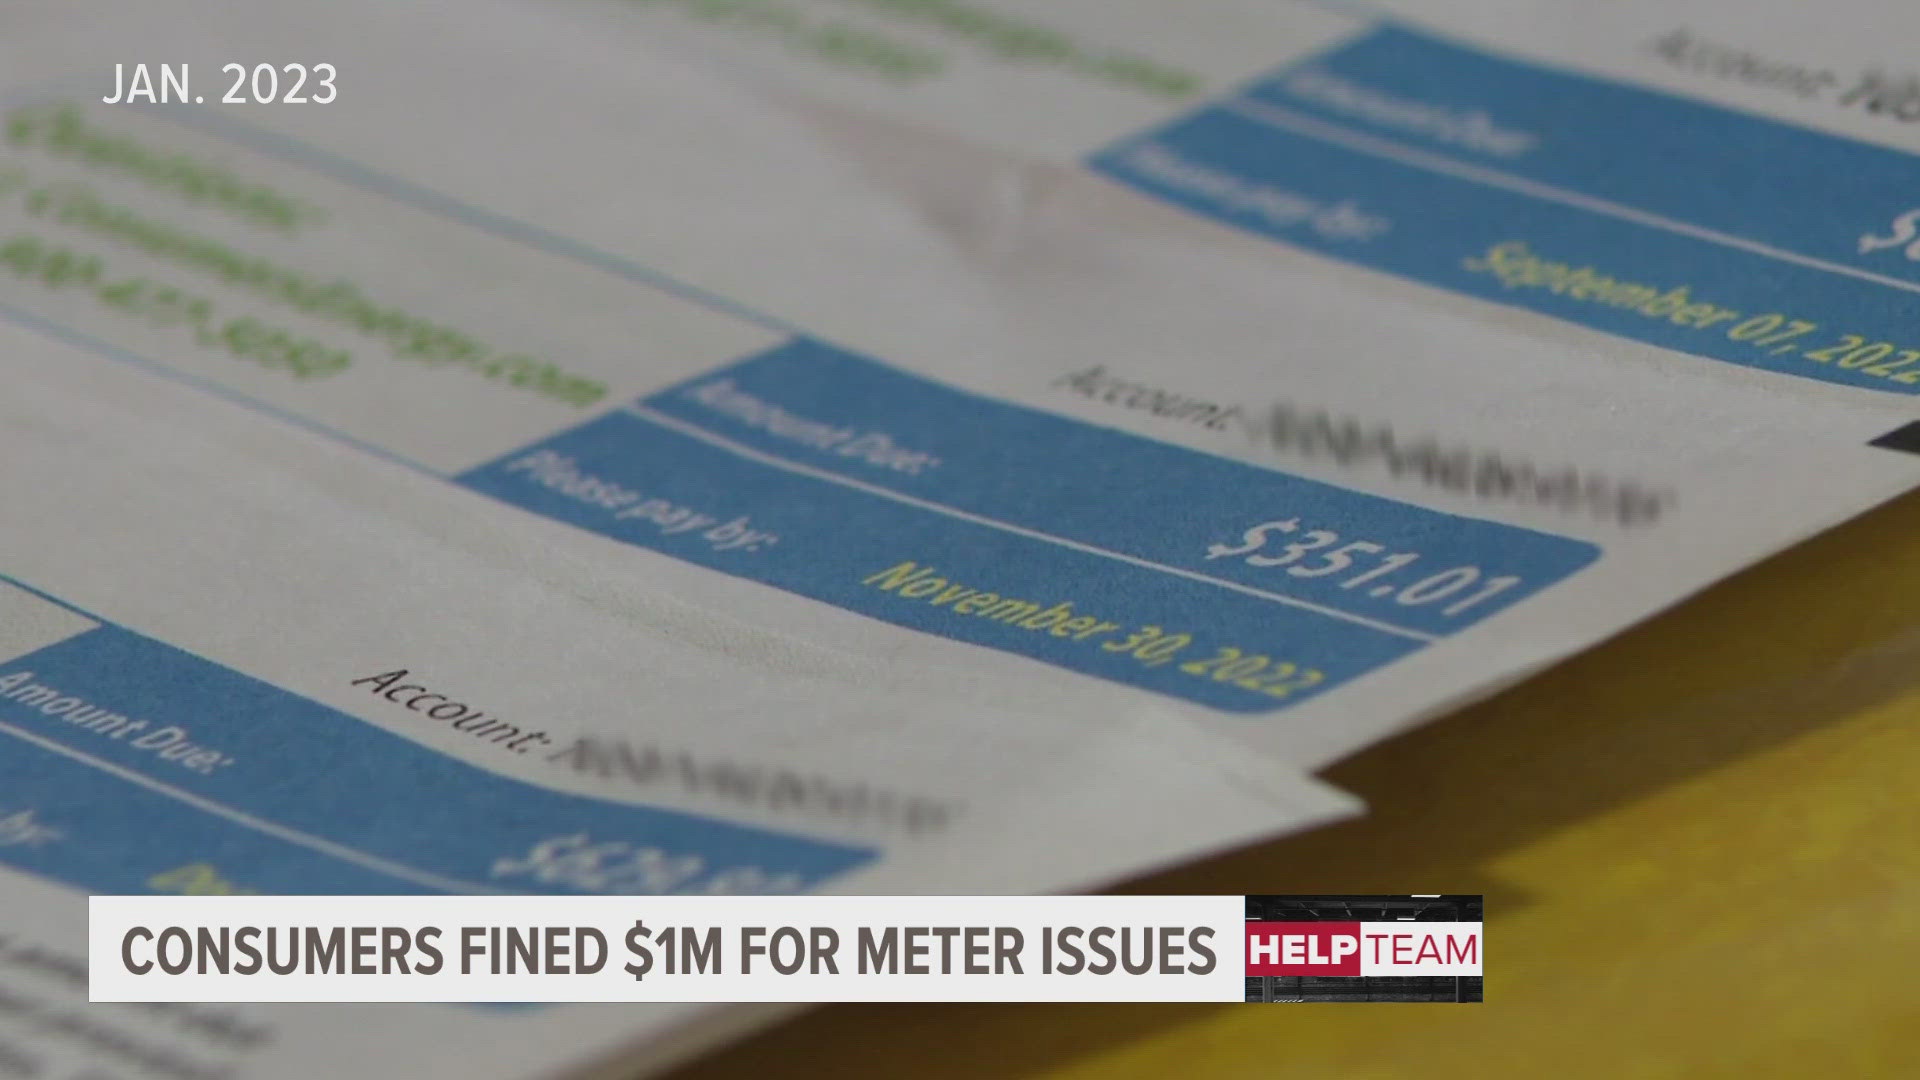 The utility company agreed to the $1 million fine after the Michigan Public Service Commission investigated complaints from customers.